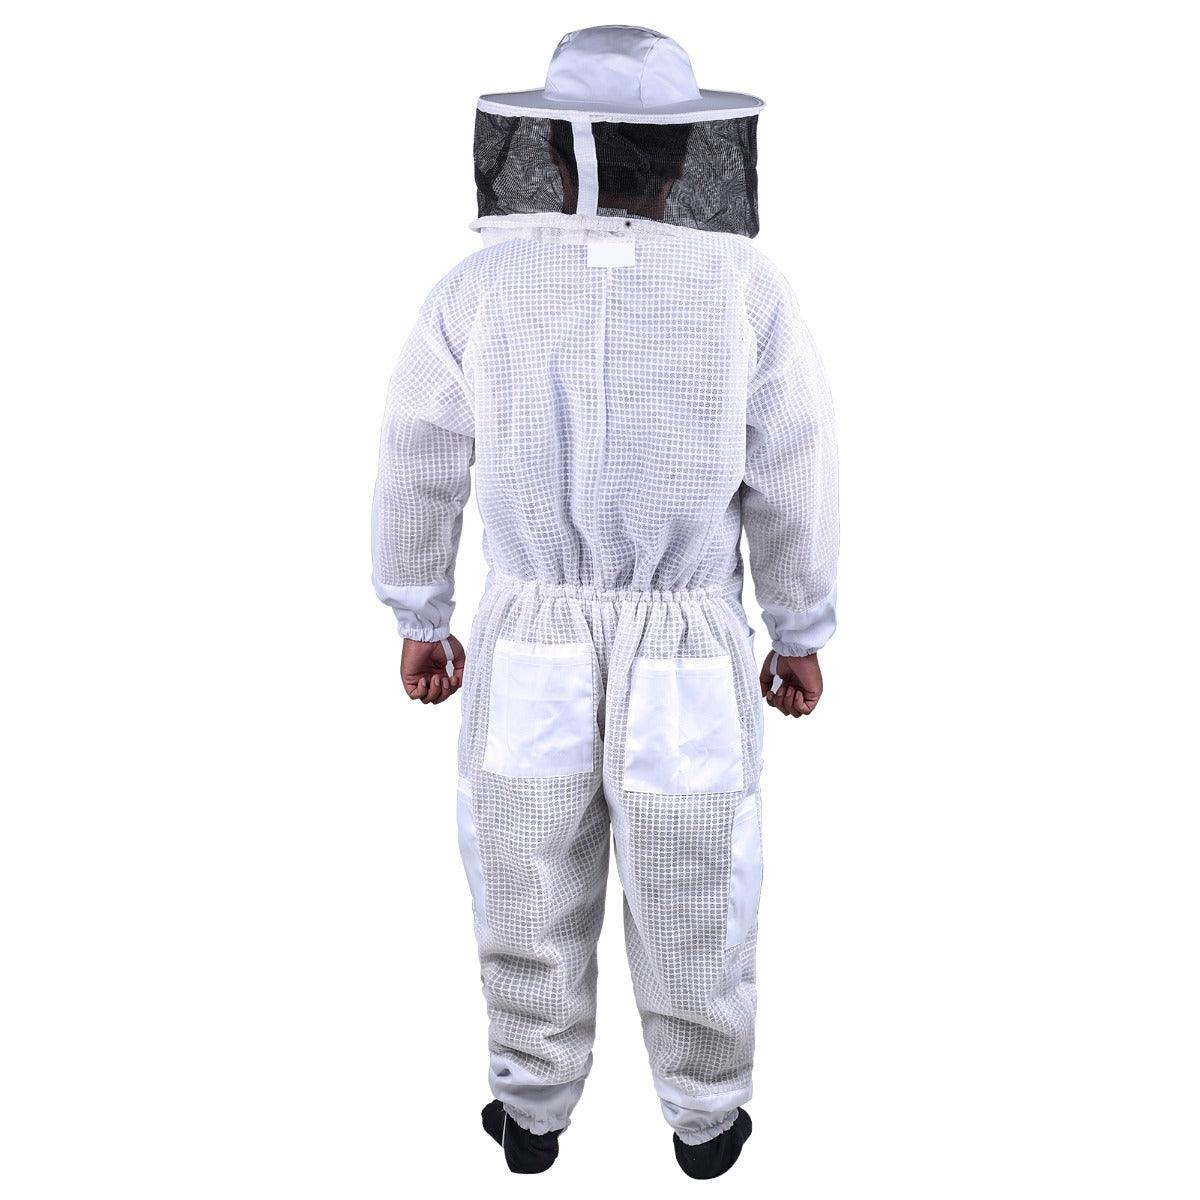 Beekeeping Bee Full Suit 3 Layer Mesh Ultra Cool Ventilated Round Head Beekeeping Protective Gear SIZE L